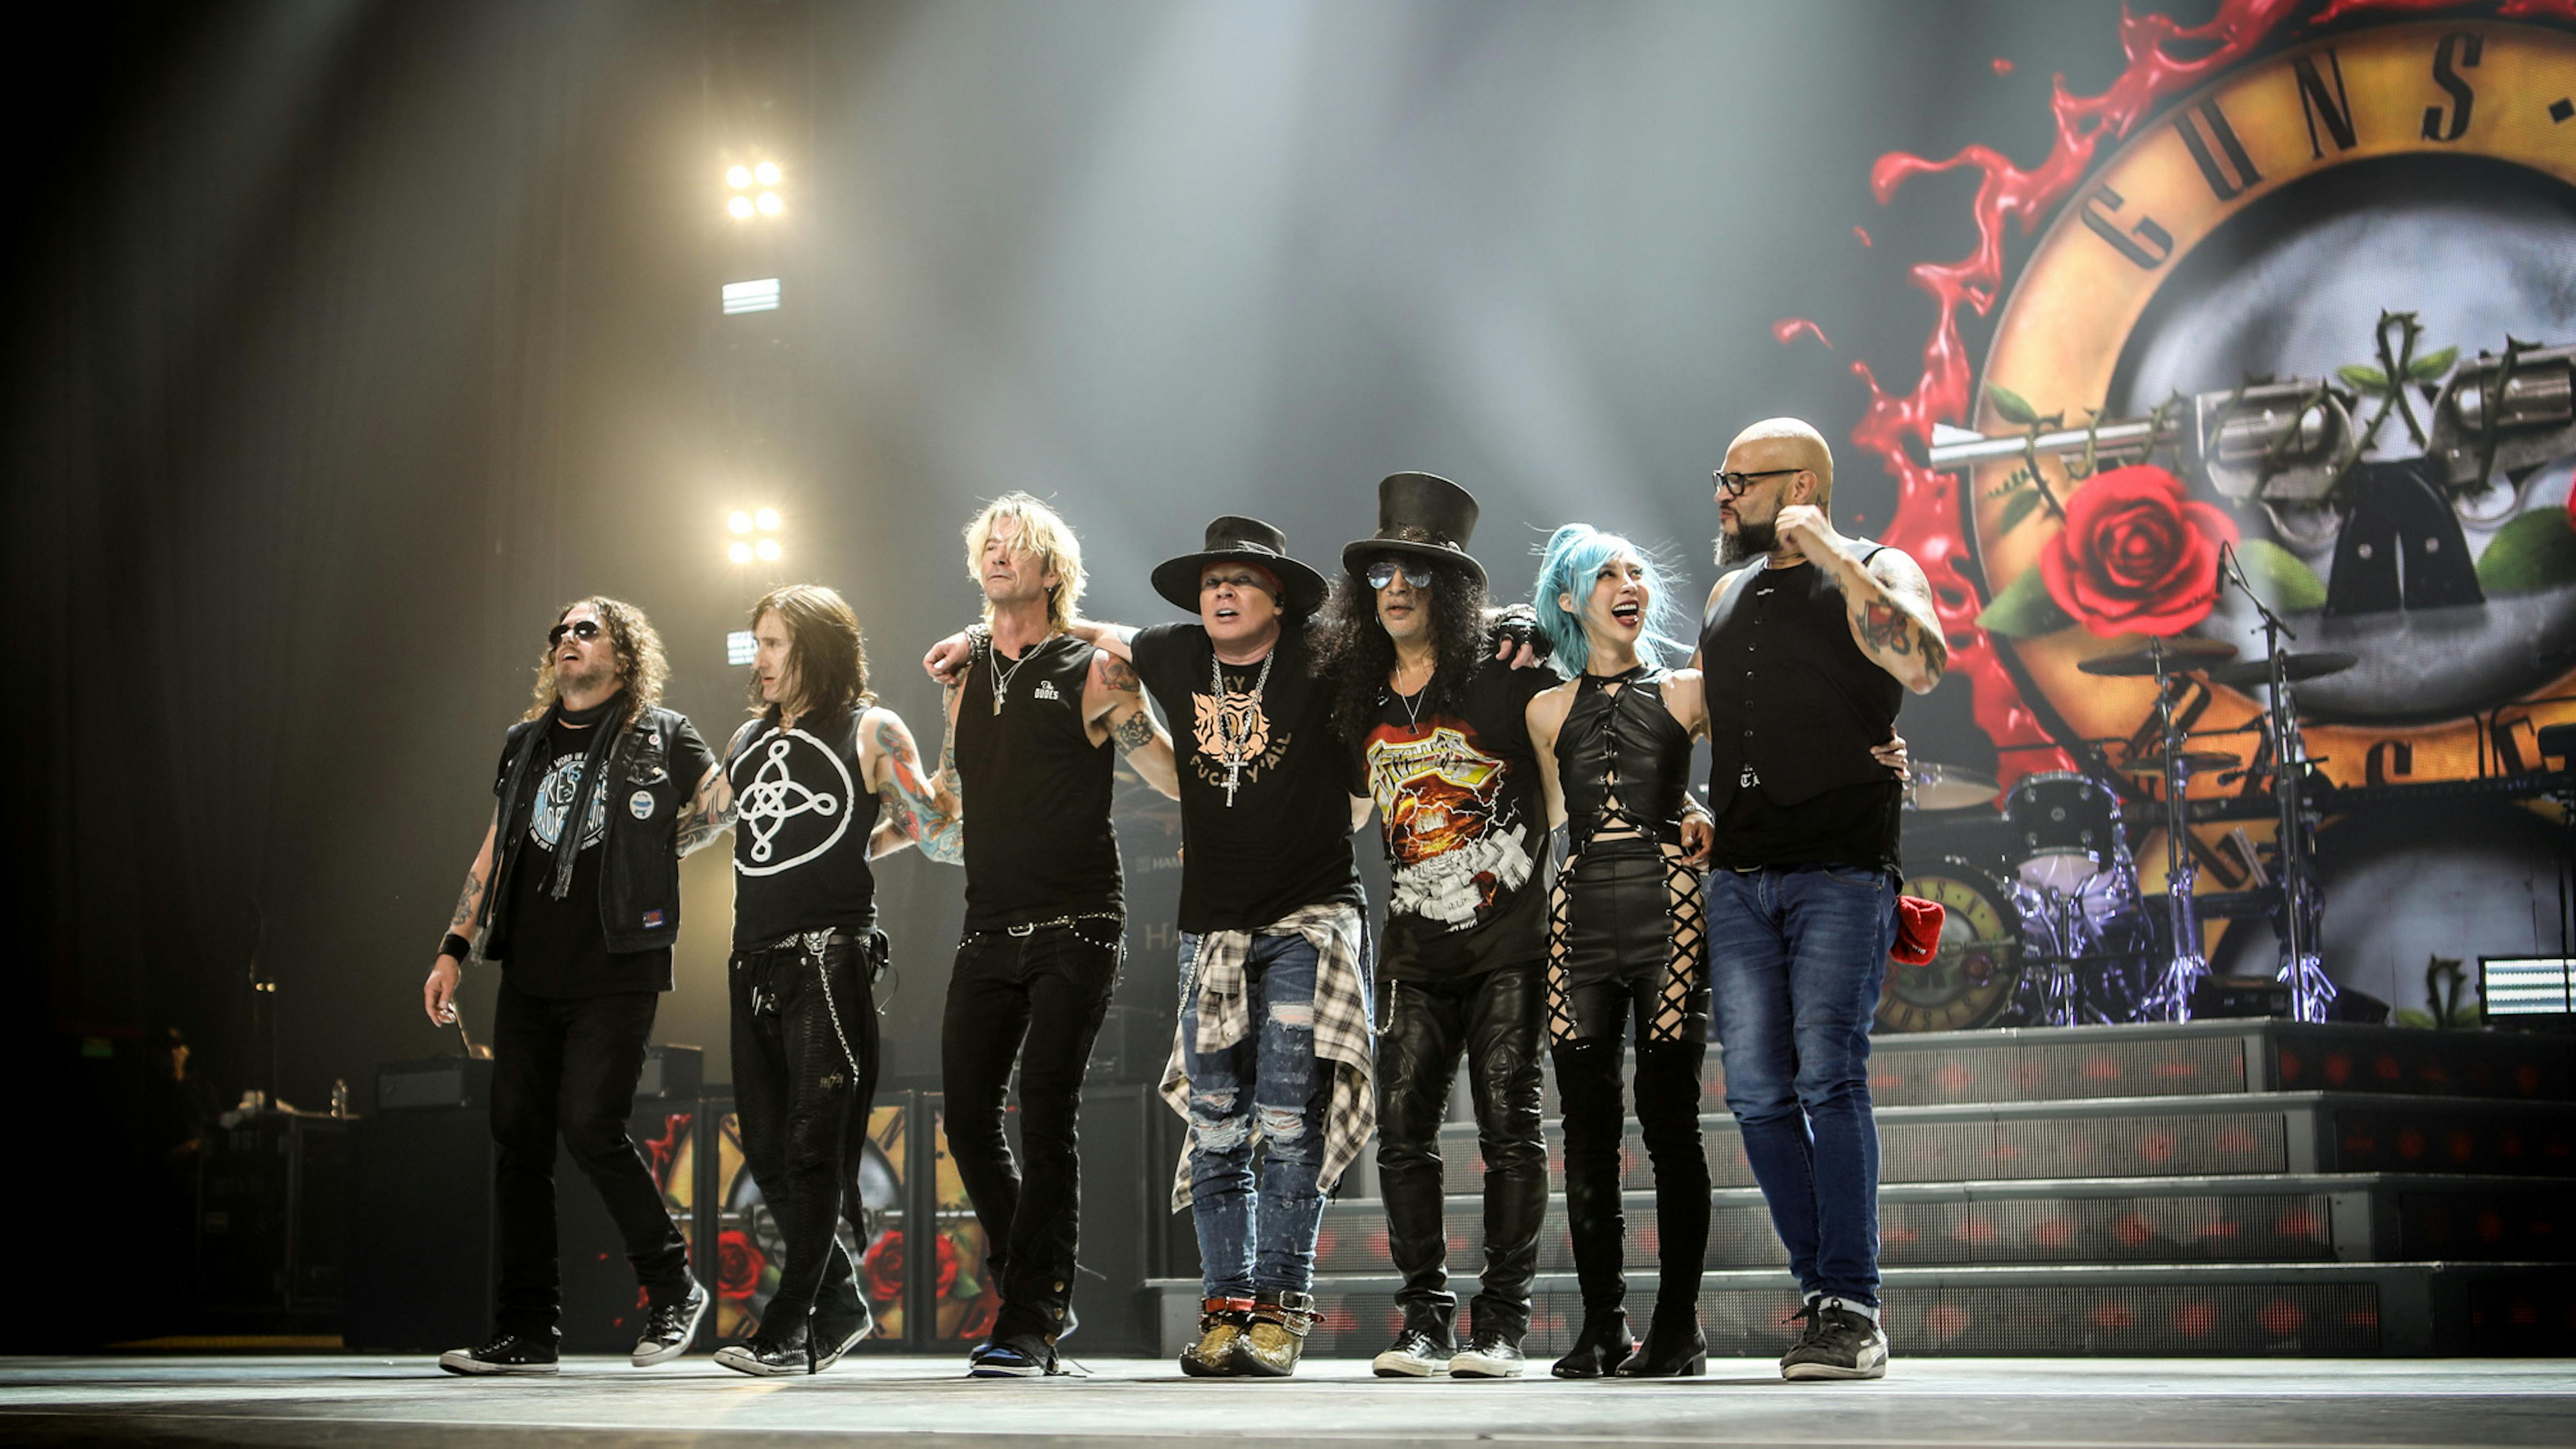 2022 Guns N’ Roses Setlist What to Expect from the Legendary Rock Band